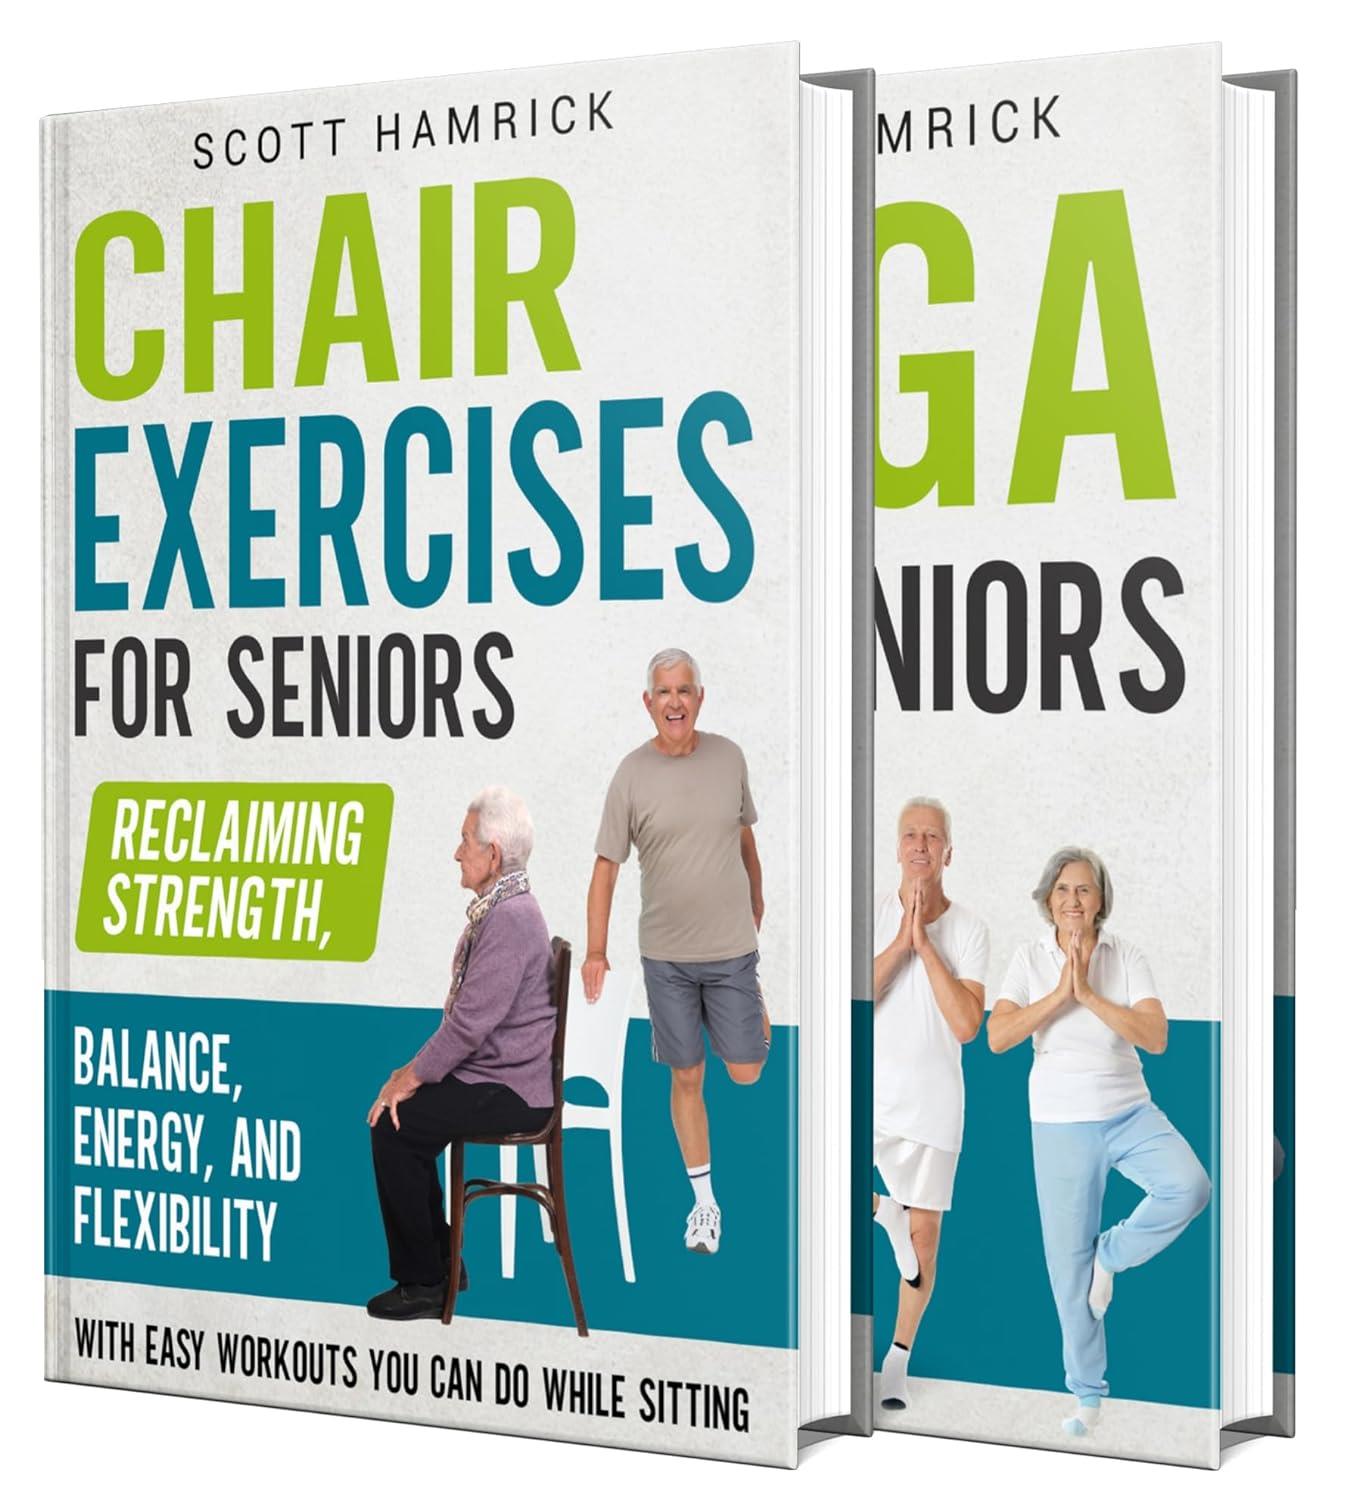 Home Workouts for Seniors: Simple Chair Exercises and Effective Yoga Poses for Different Positions